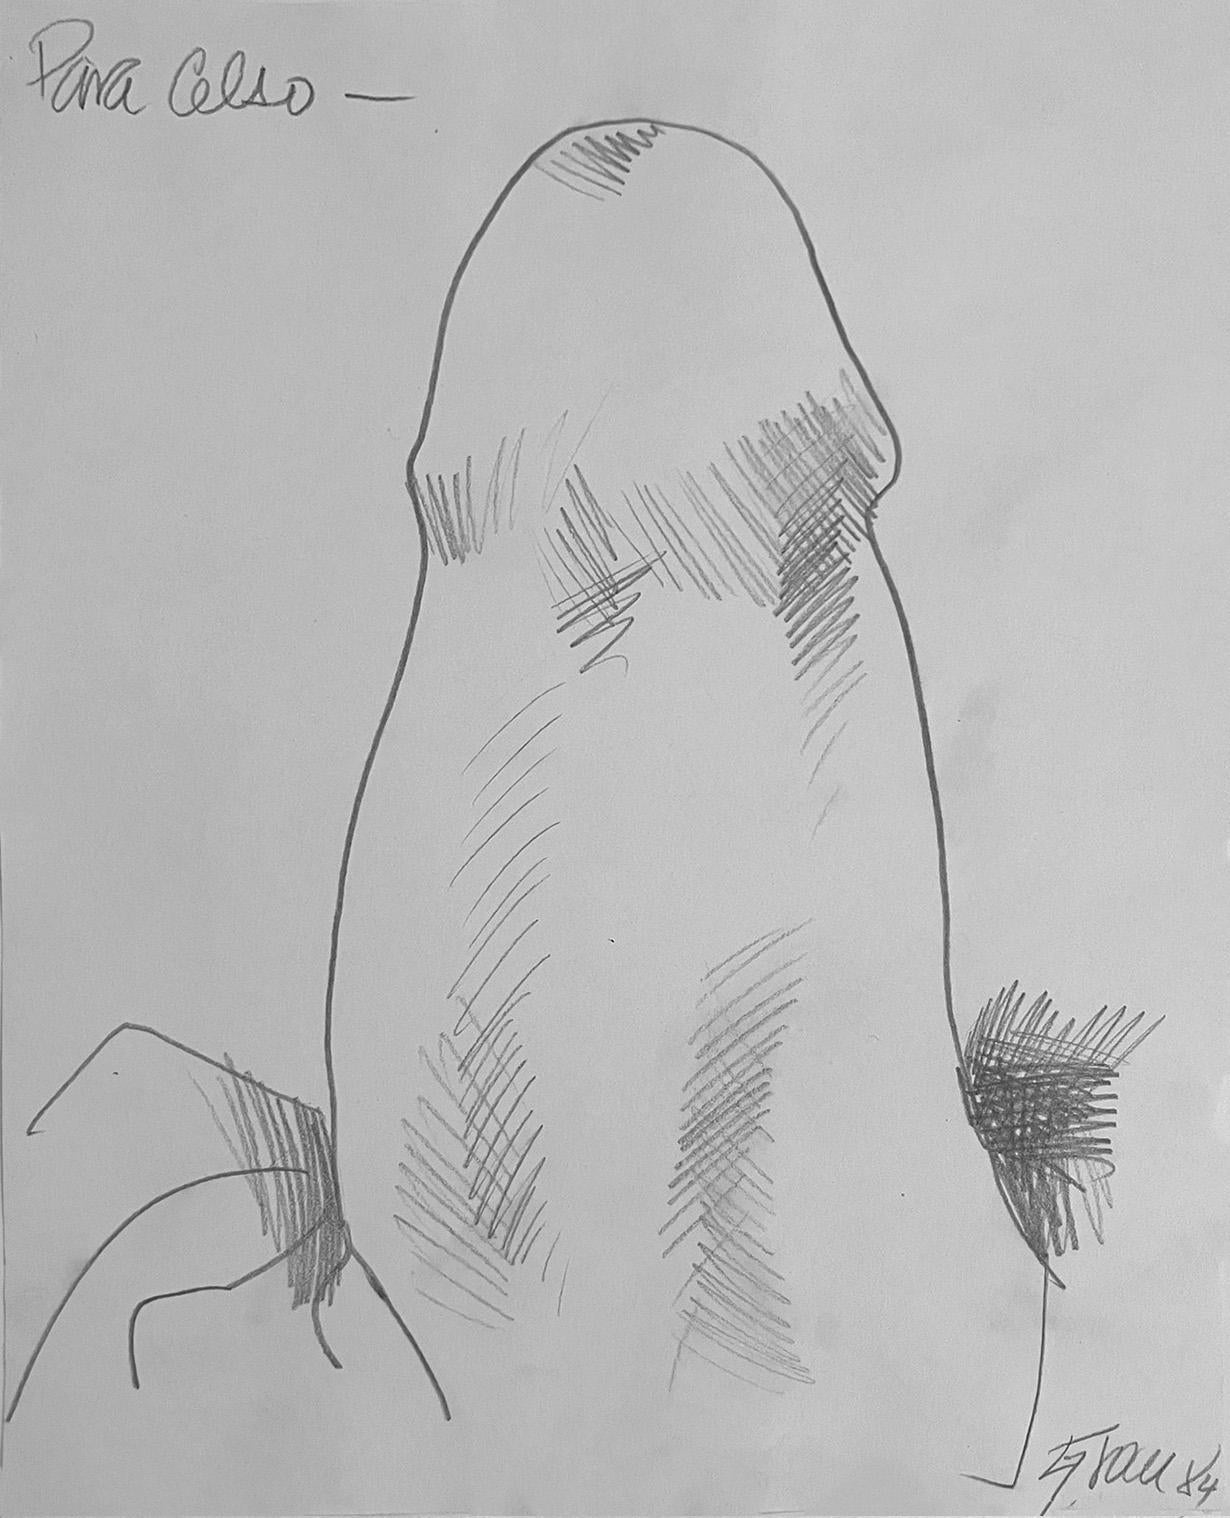 Untitled III, Nude drawing on paper - Art by Enrique Grau